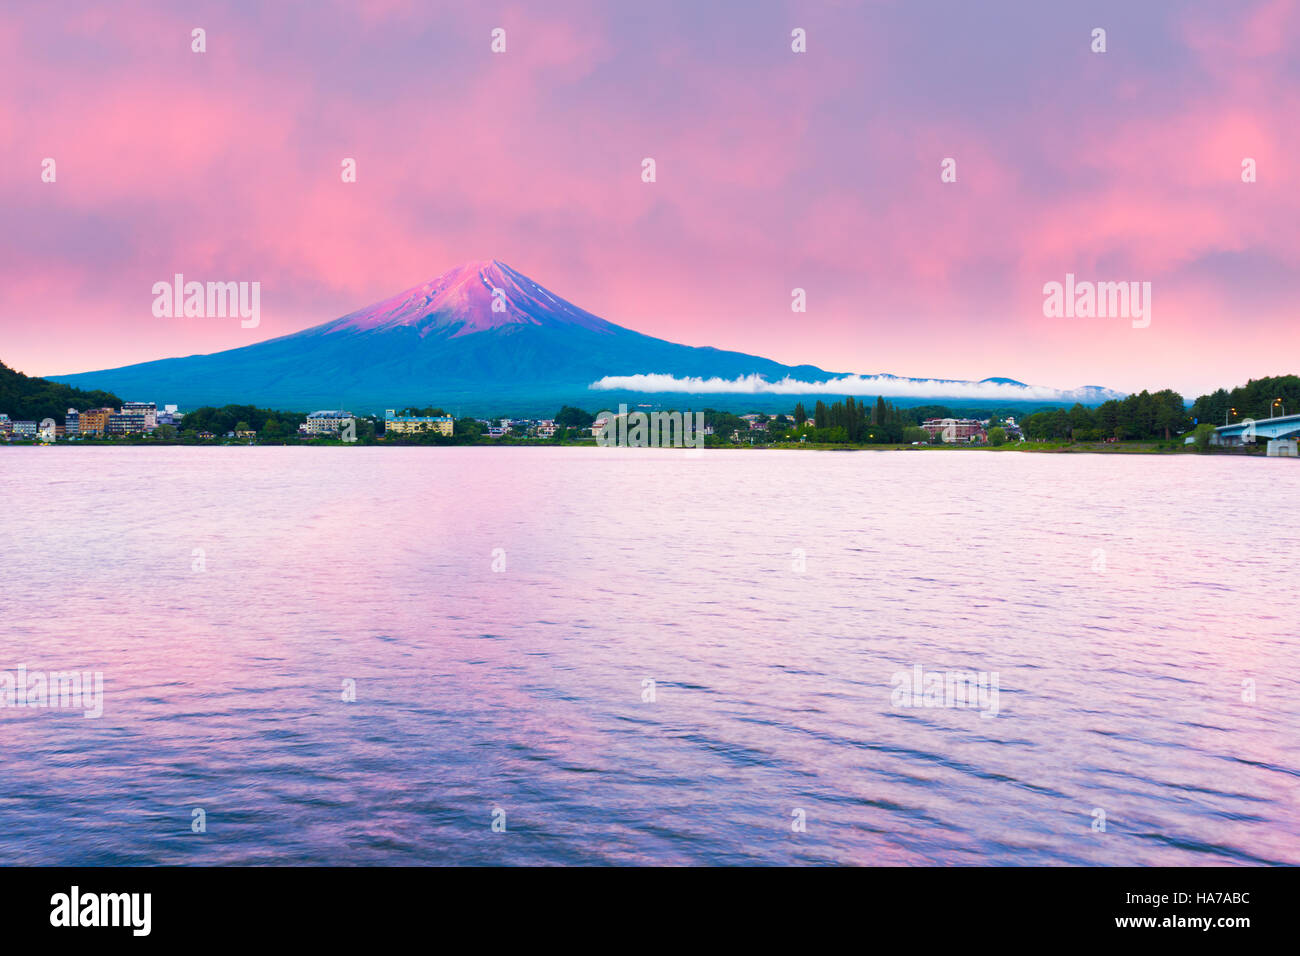 Fiery colorful sky above the red crater cone of Mount Fuji at dawn sunrise over Lake Kawaguchiko water on summer morning, Japan Stock Photo